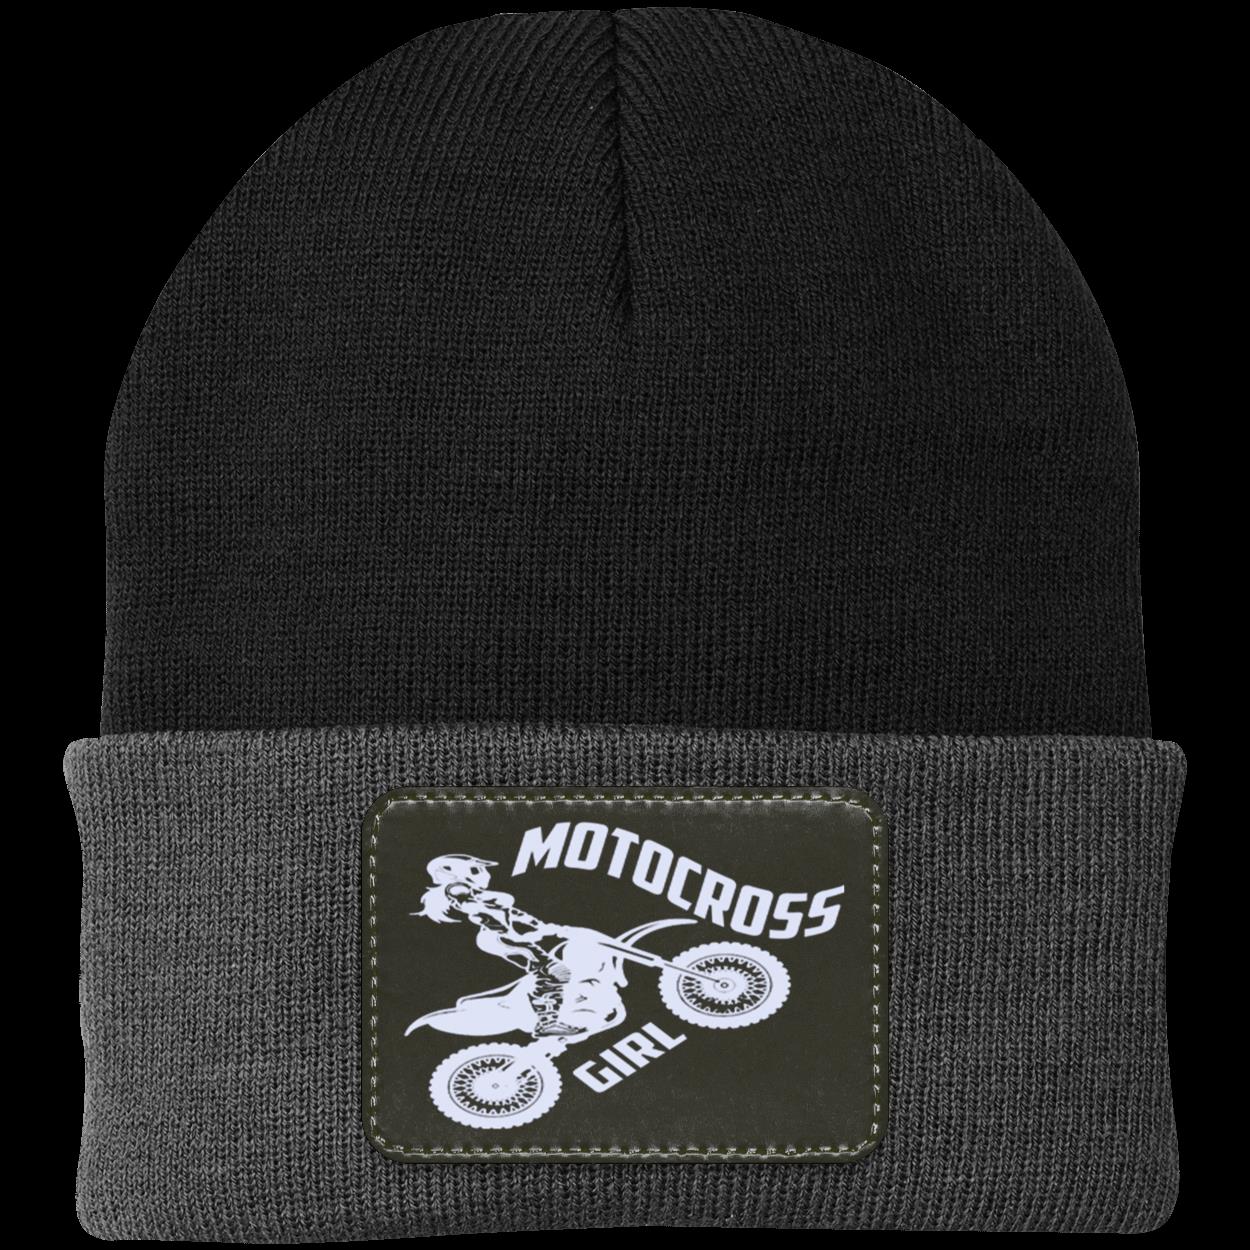 Motocross Girl Patched Knit Cap